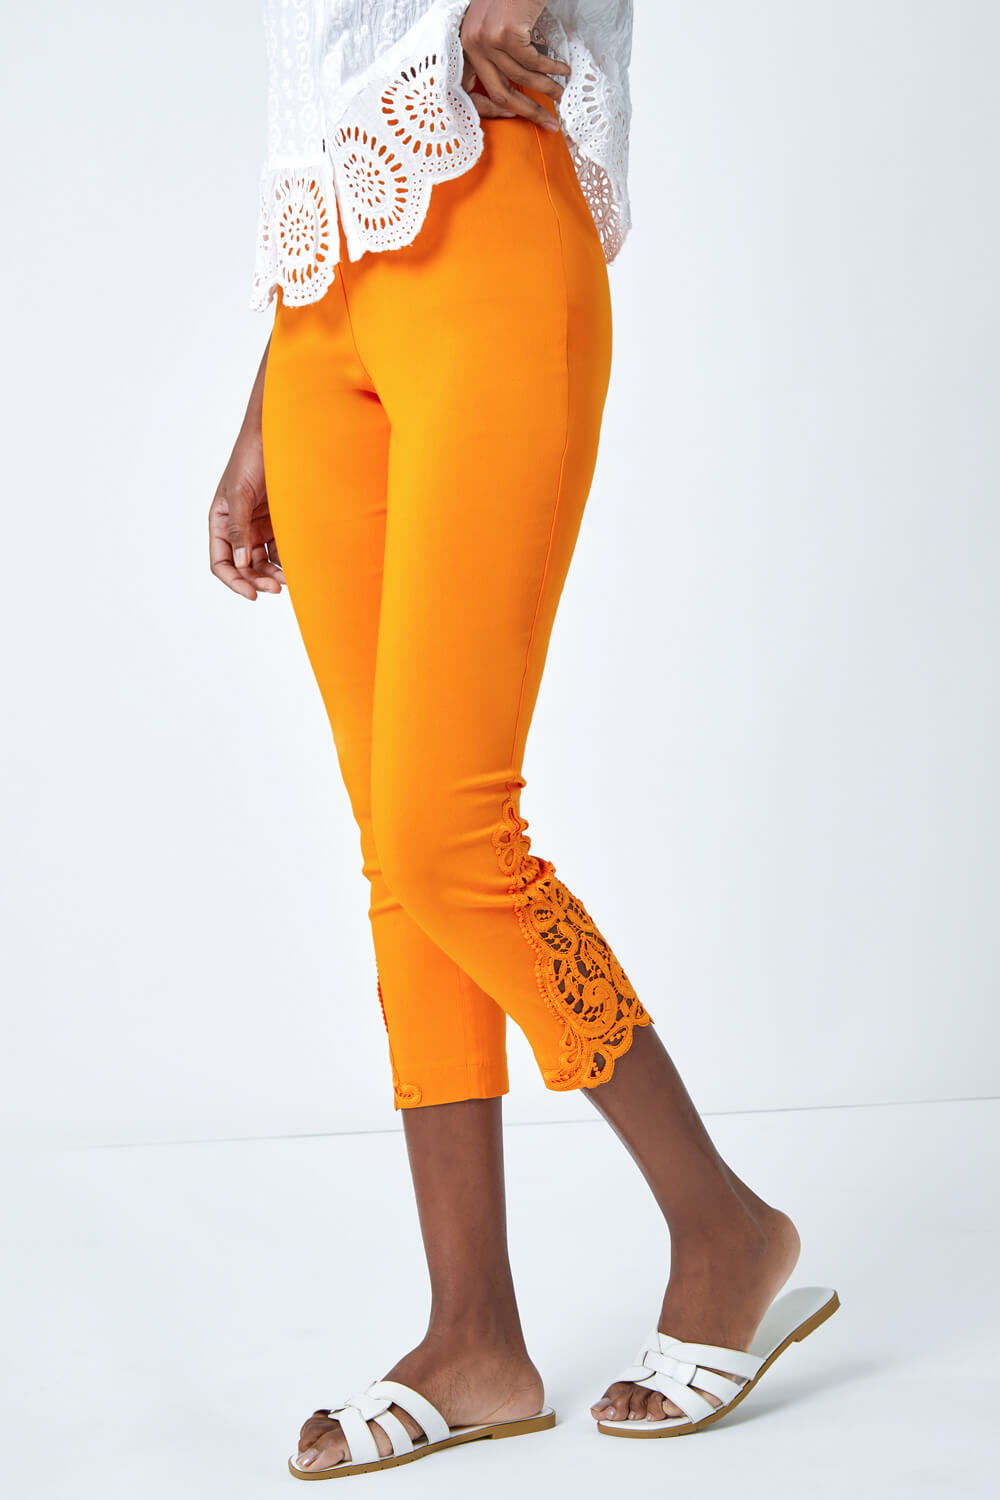 ORANGE Lace Insert Crop Stretch Trousers, Image 4 of 5